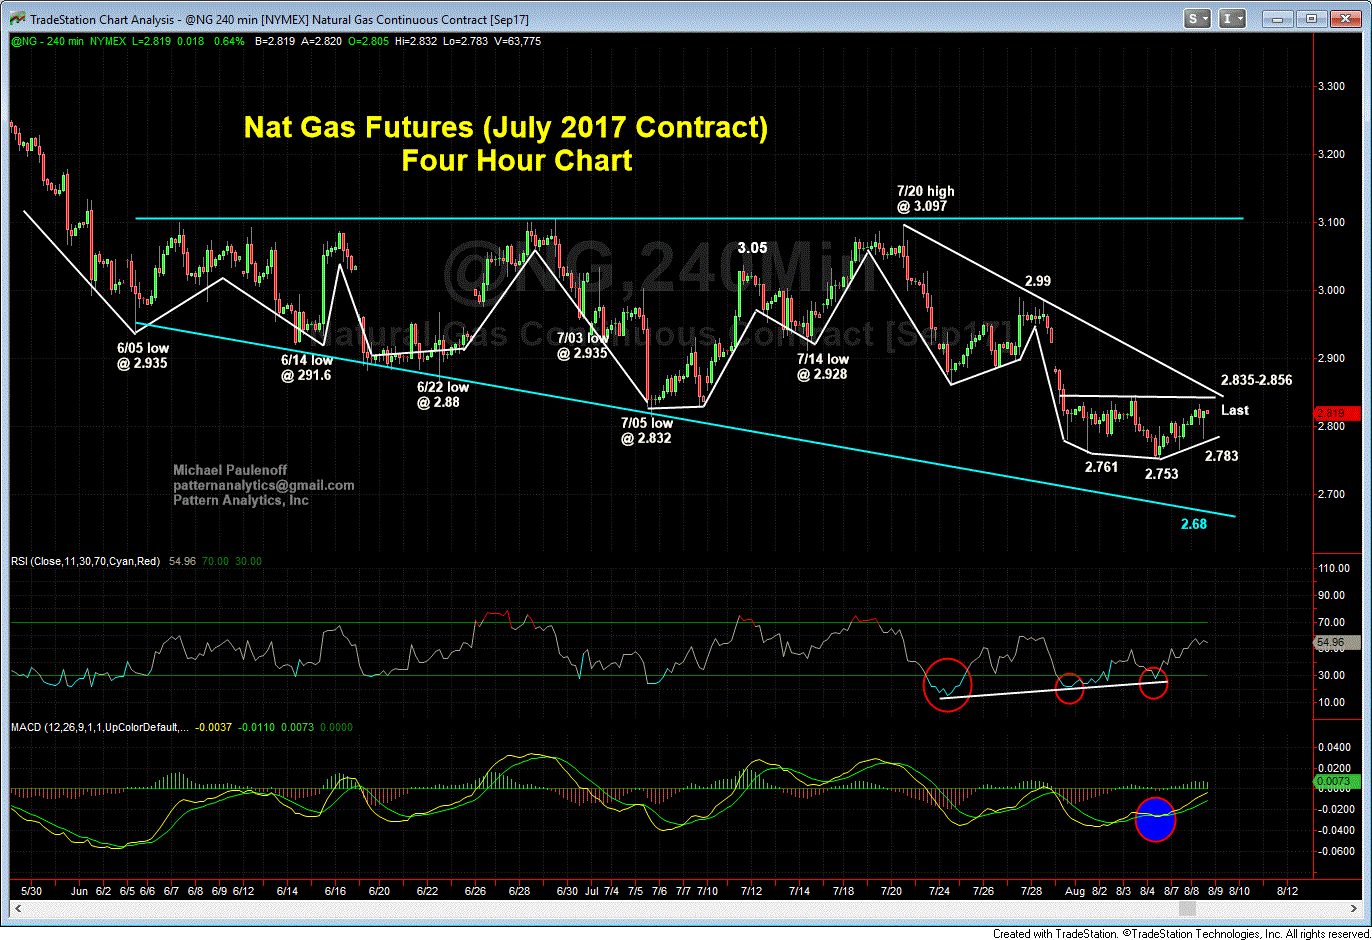 Nat Gas Futures 4 Hour Chart